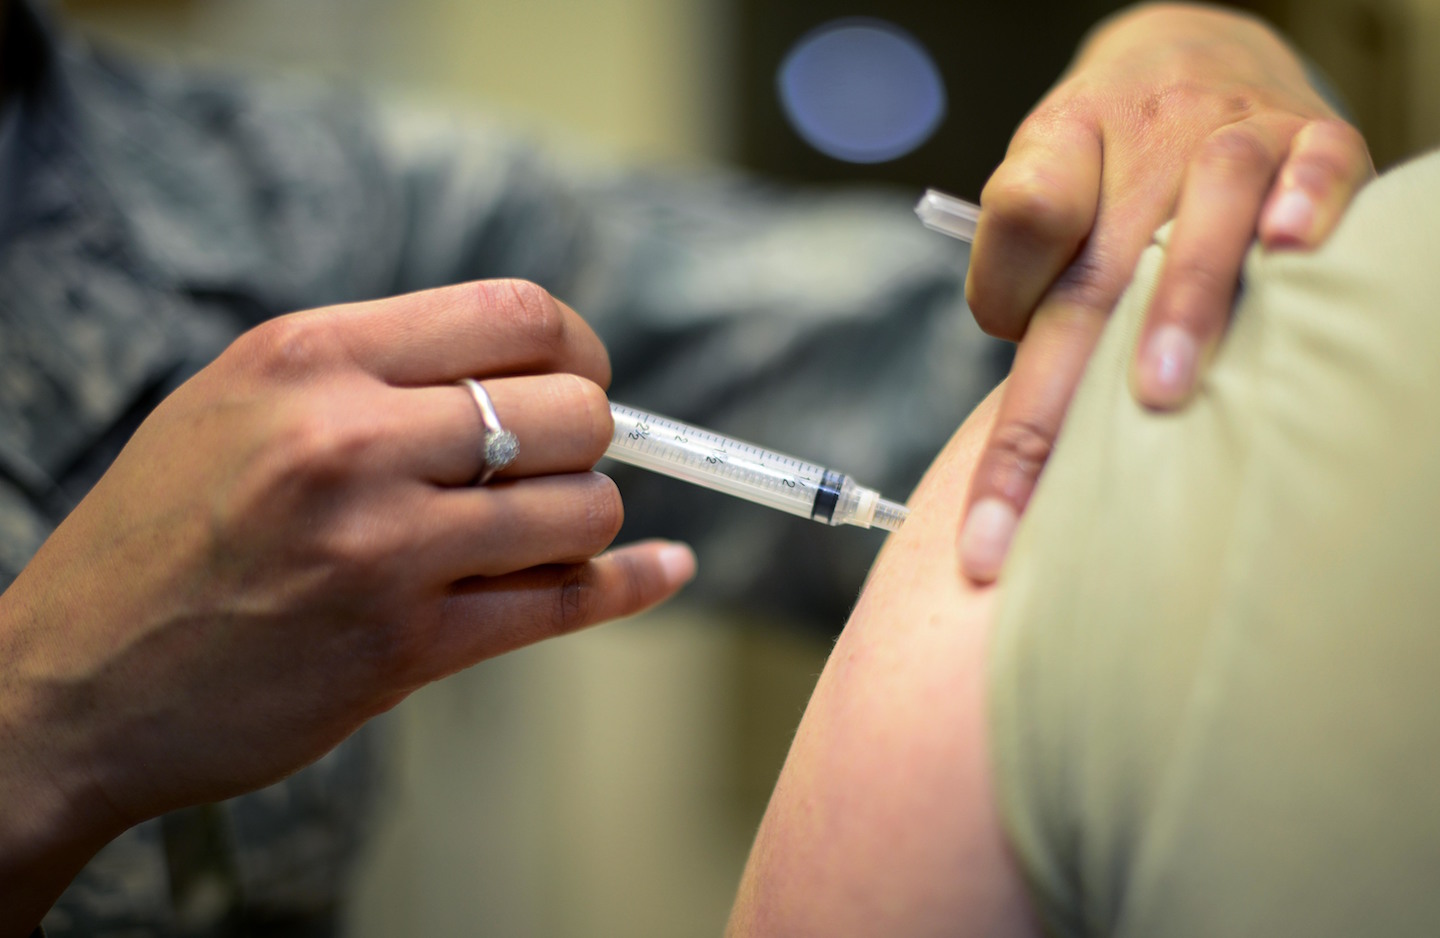 Image: One million COVID-19 vaccines sent to South Africa put on hold as the vaccine fails basic tests for safety, effectiveness